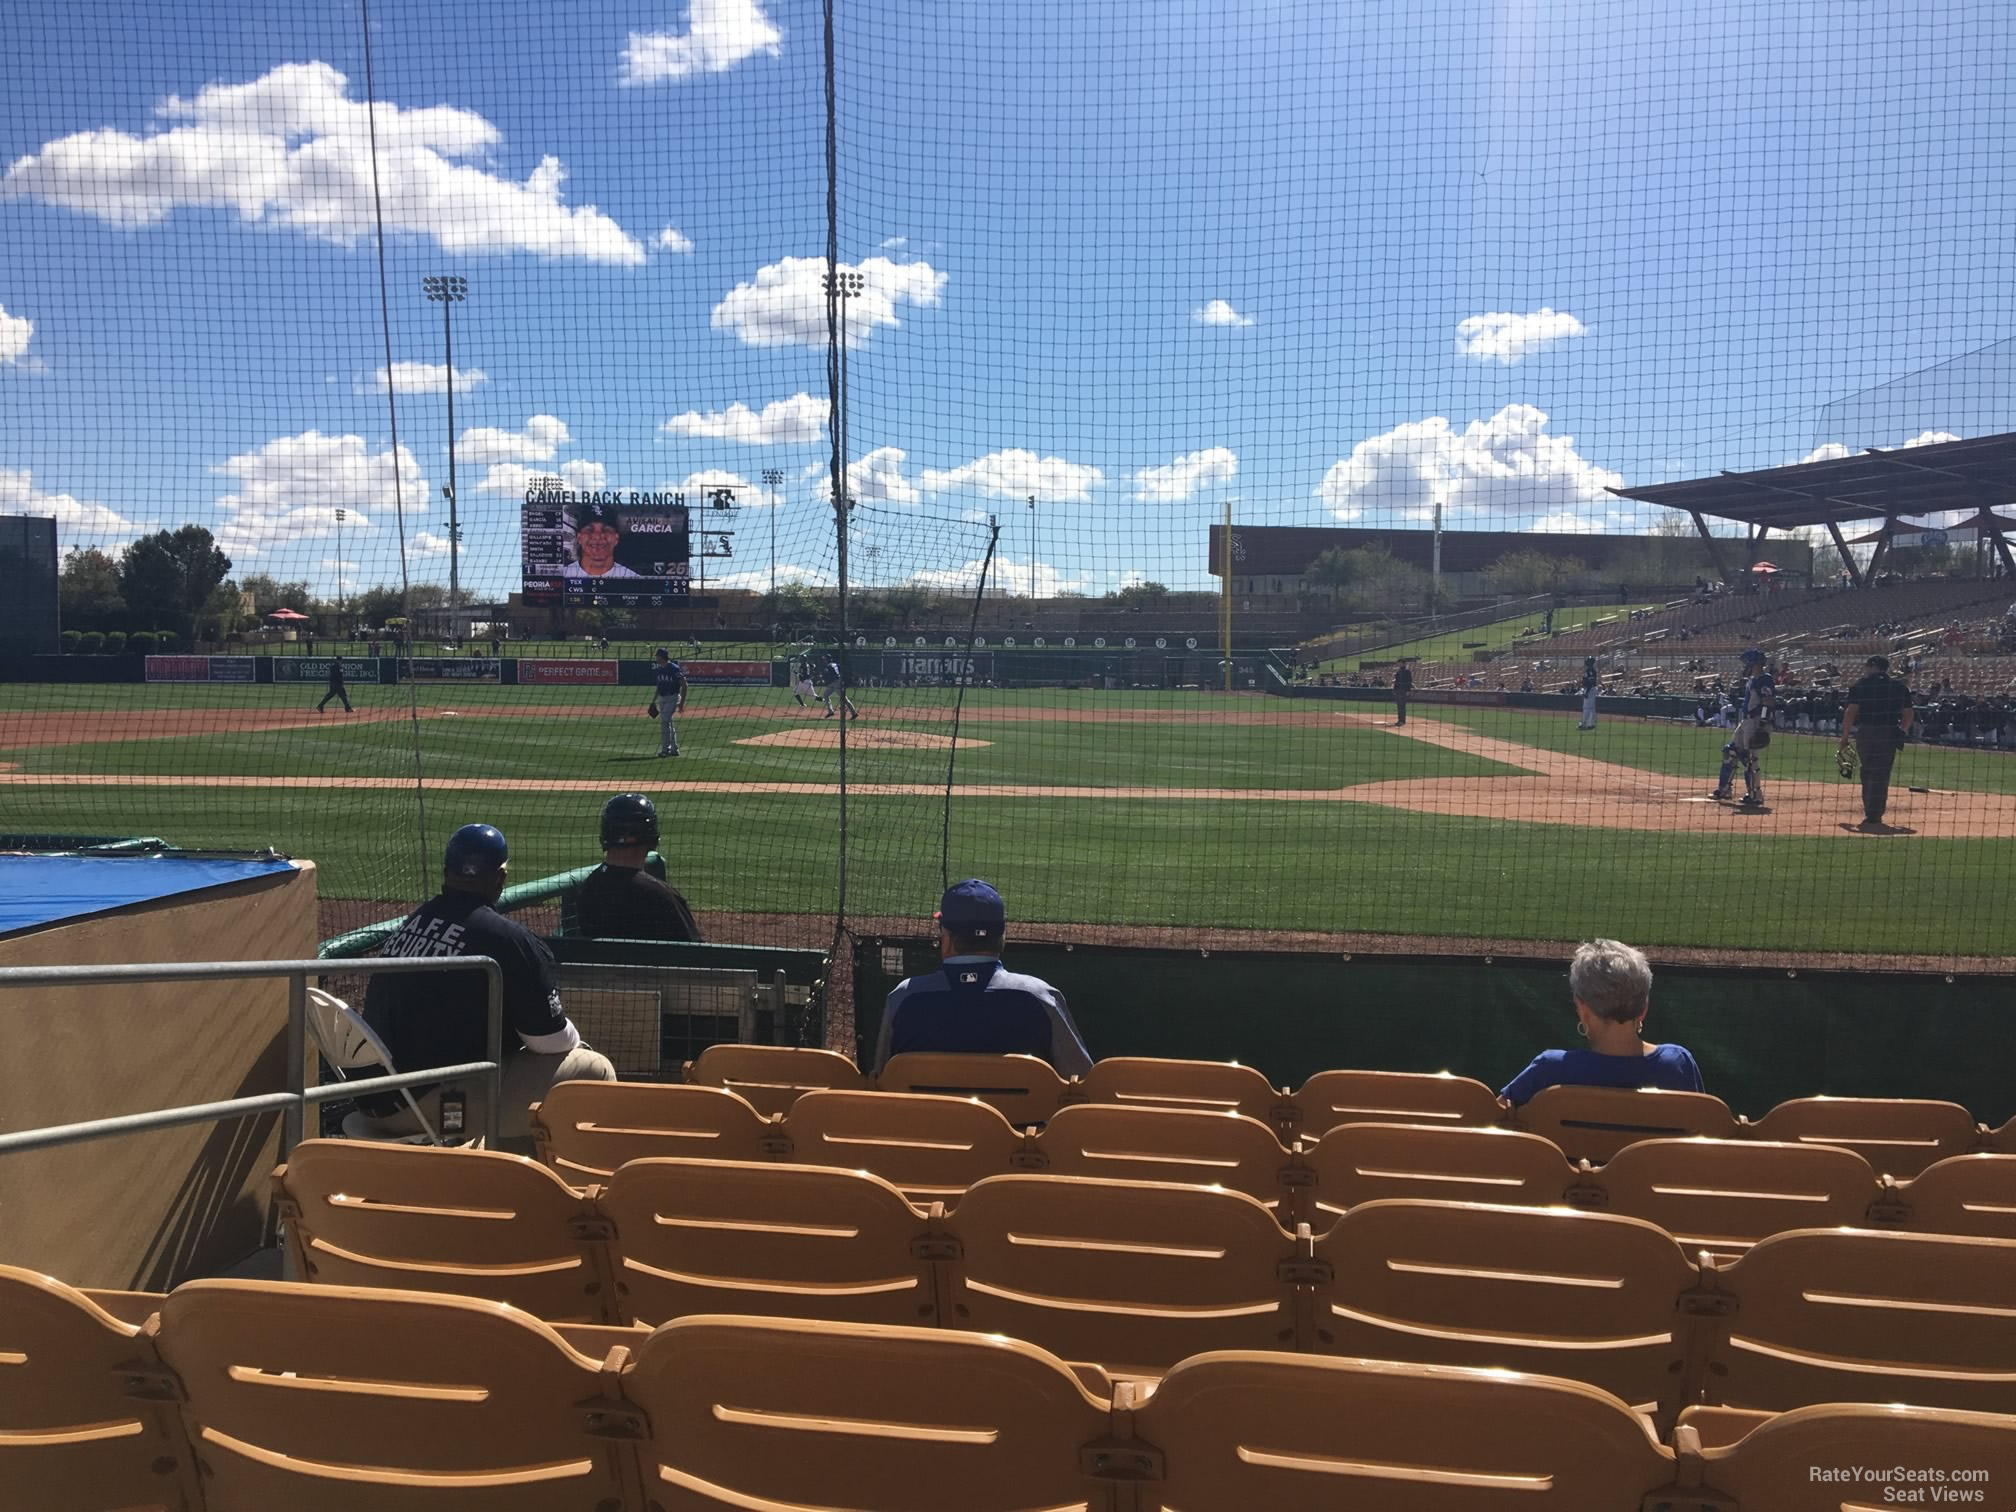 section 19, row 6 seat view  - camelback ranch